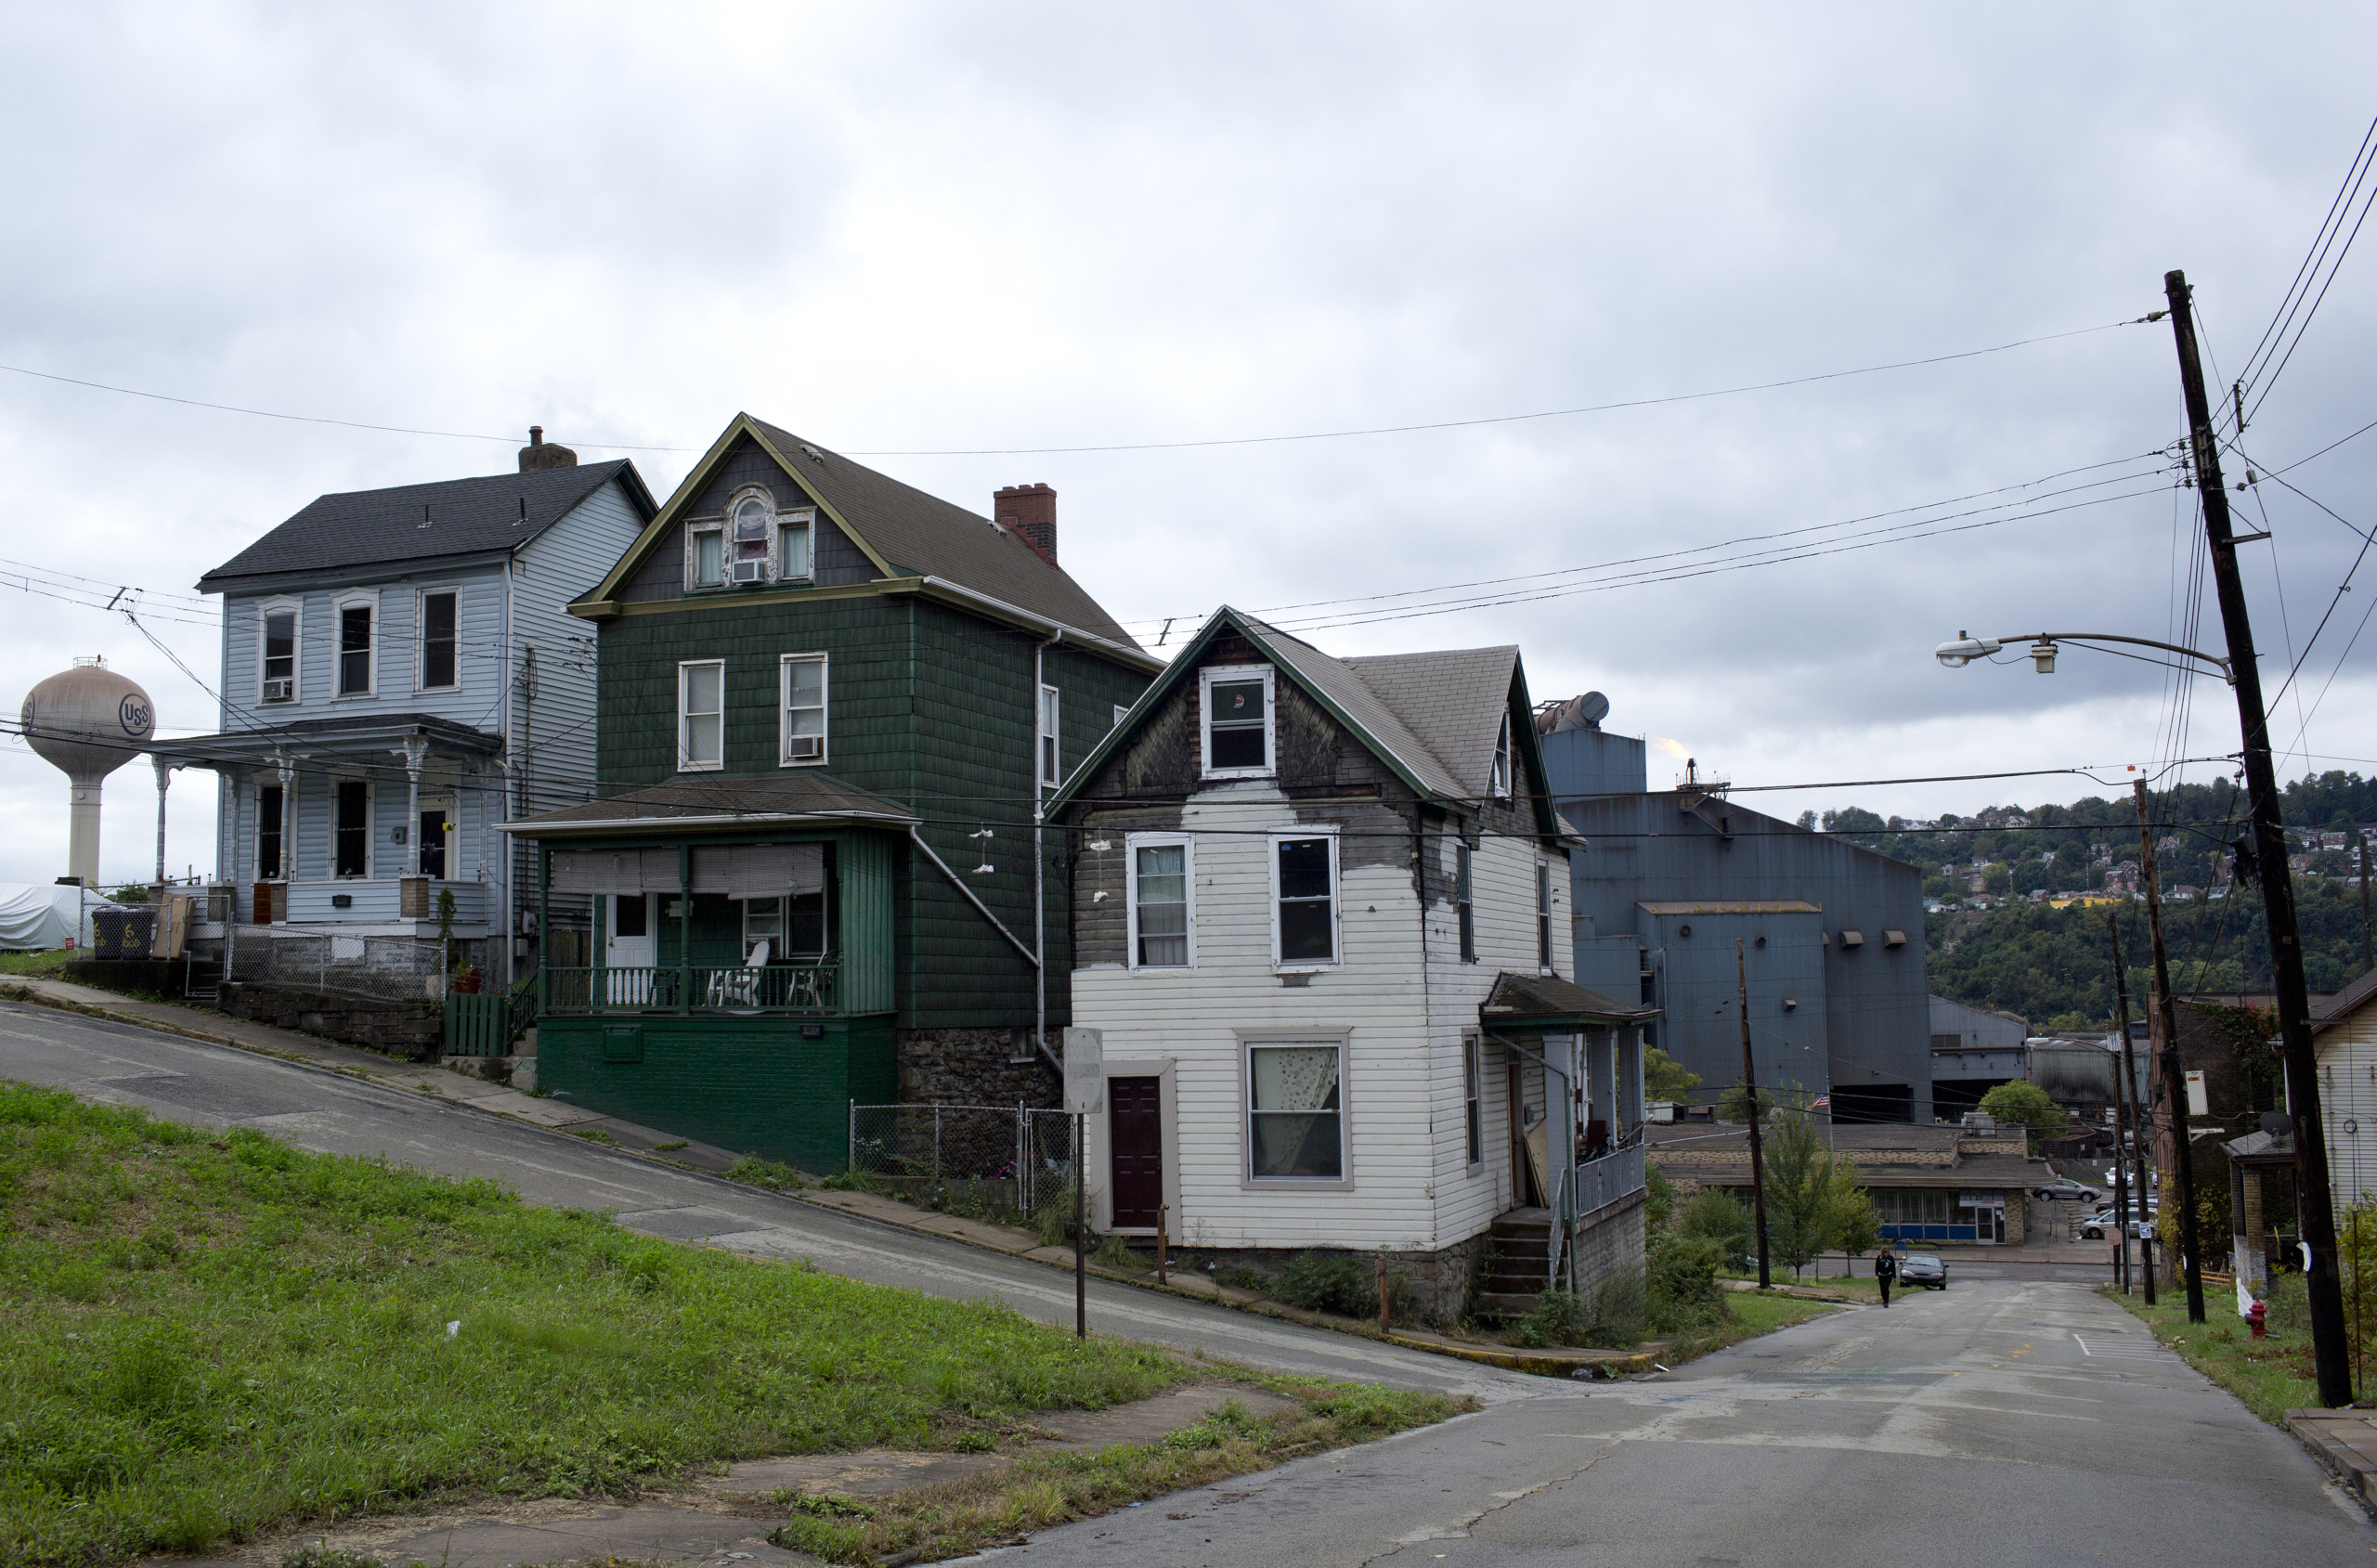 Inequality in the Promised Land: Race, Resources, and Suburb